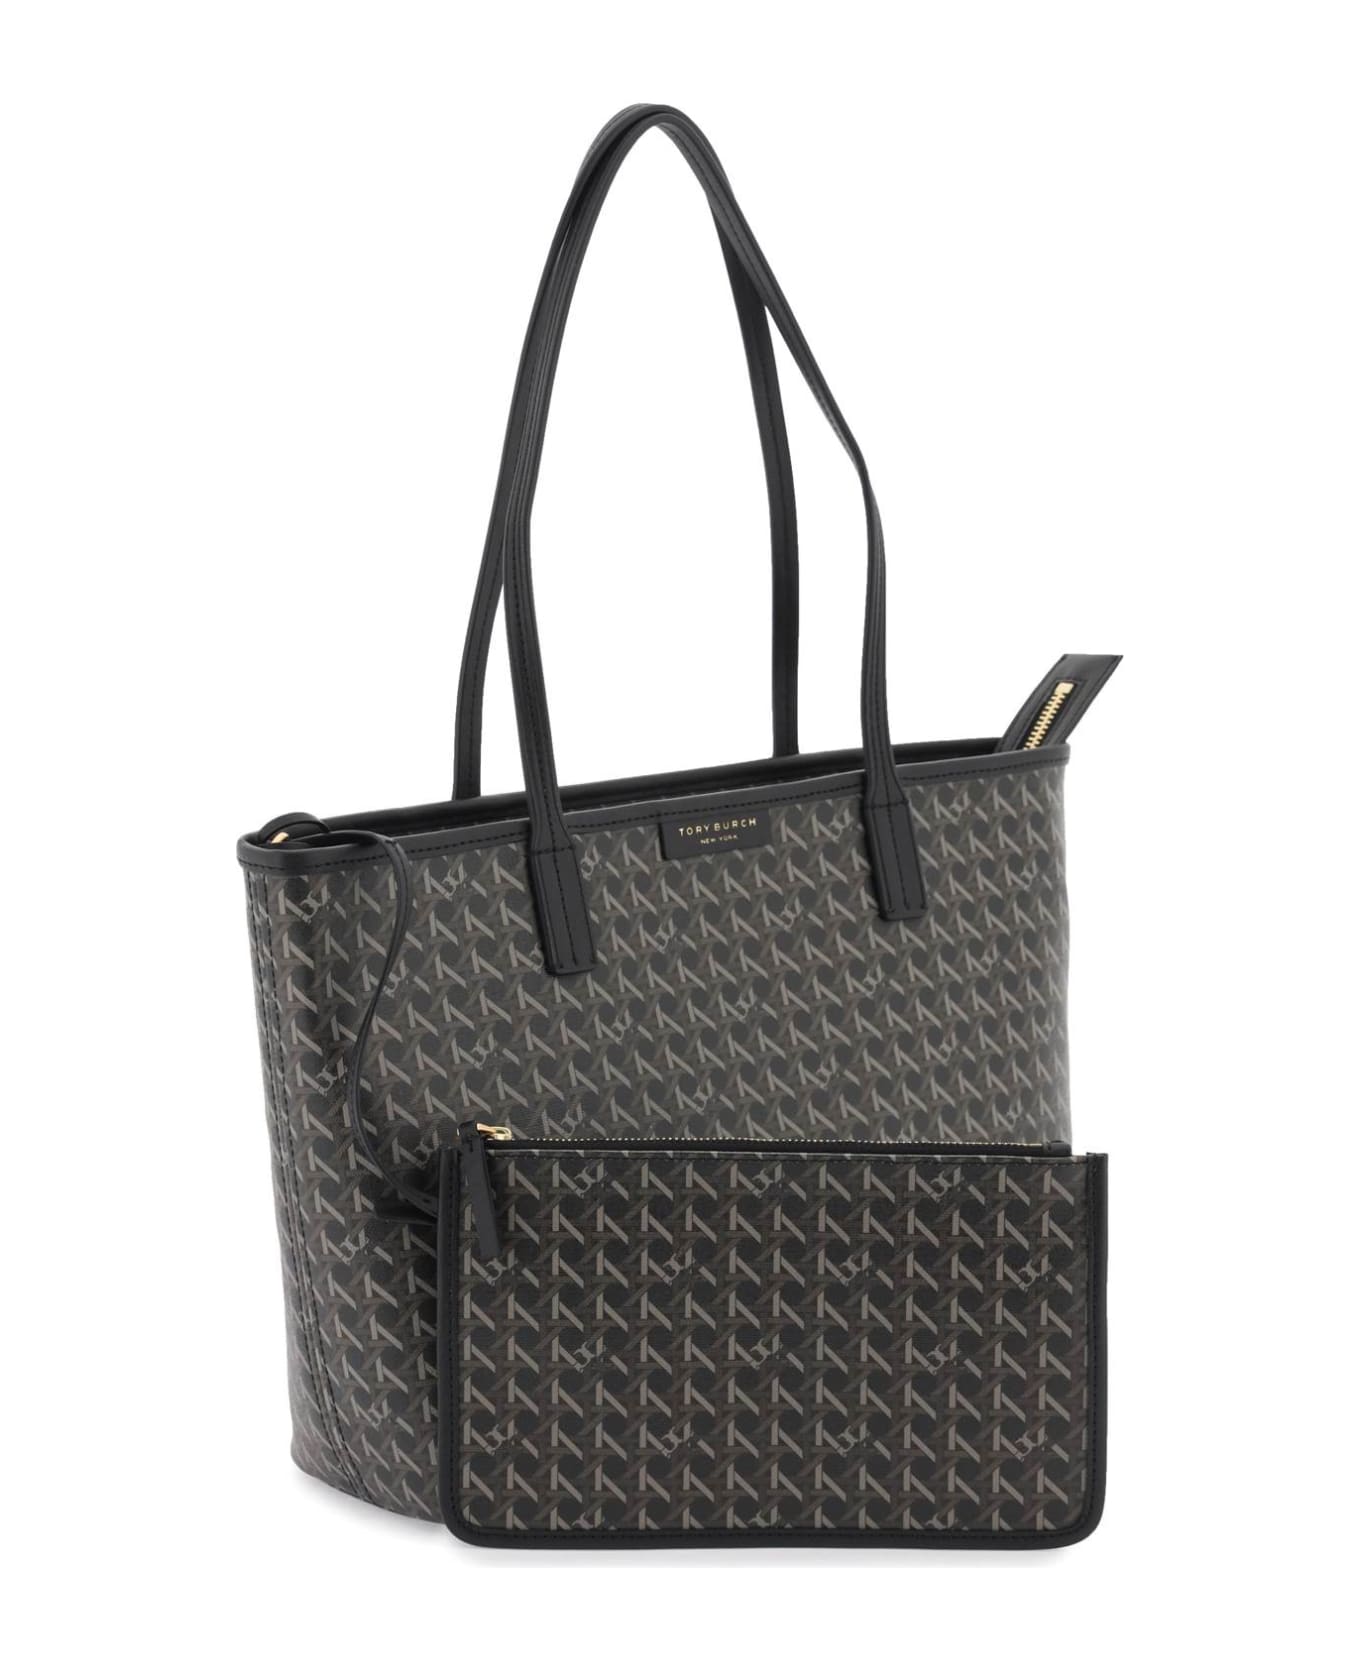 Tory Burch Ever-ready Small Tote Bag - Black